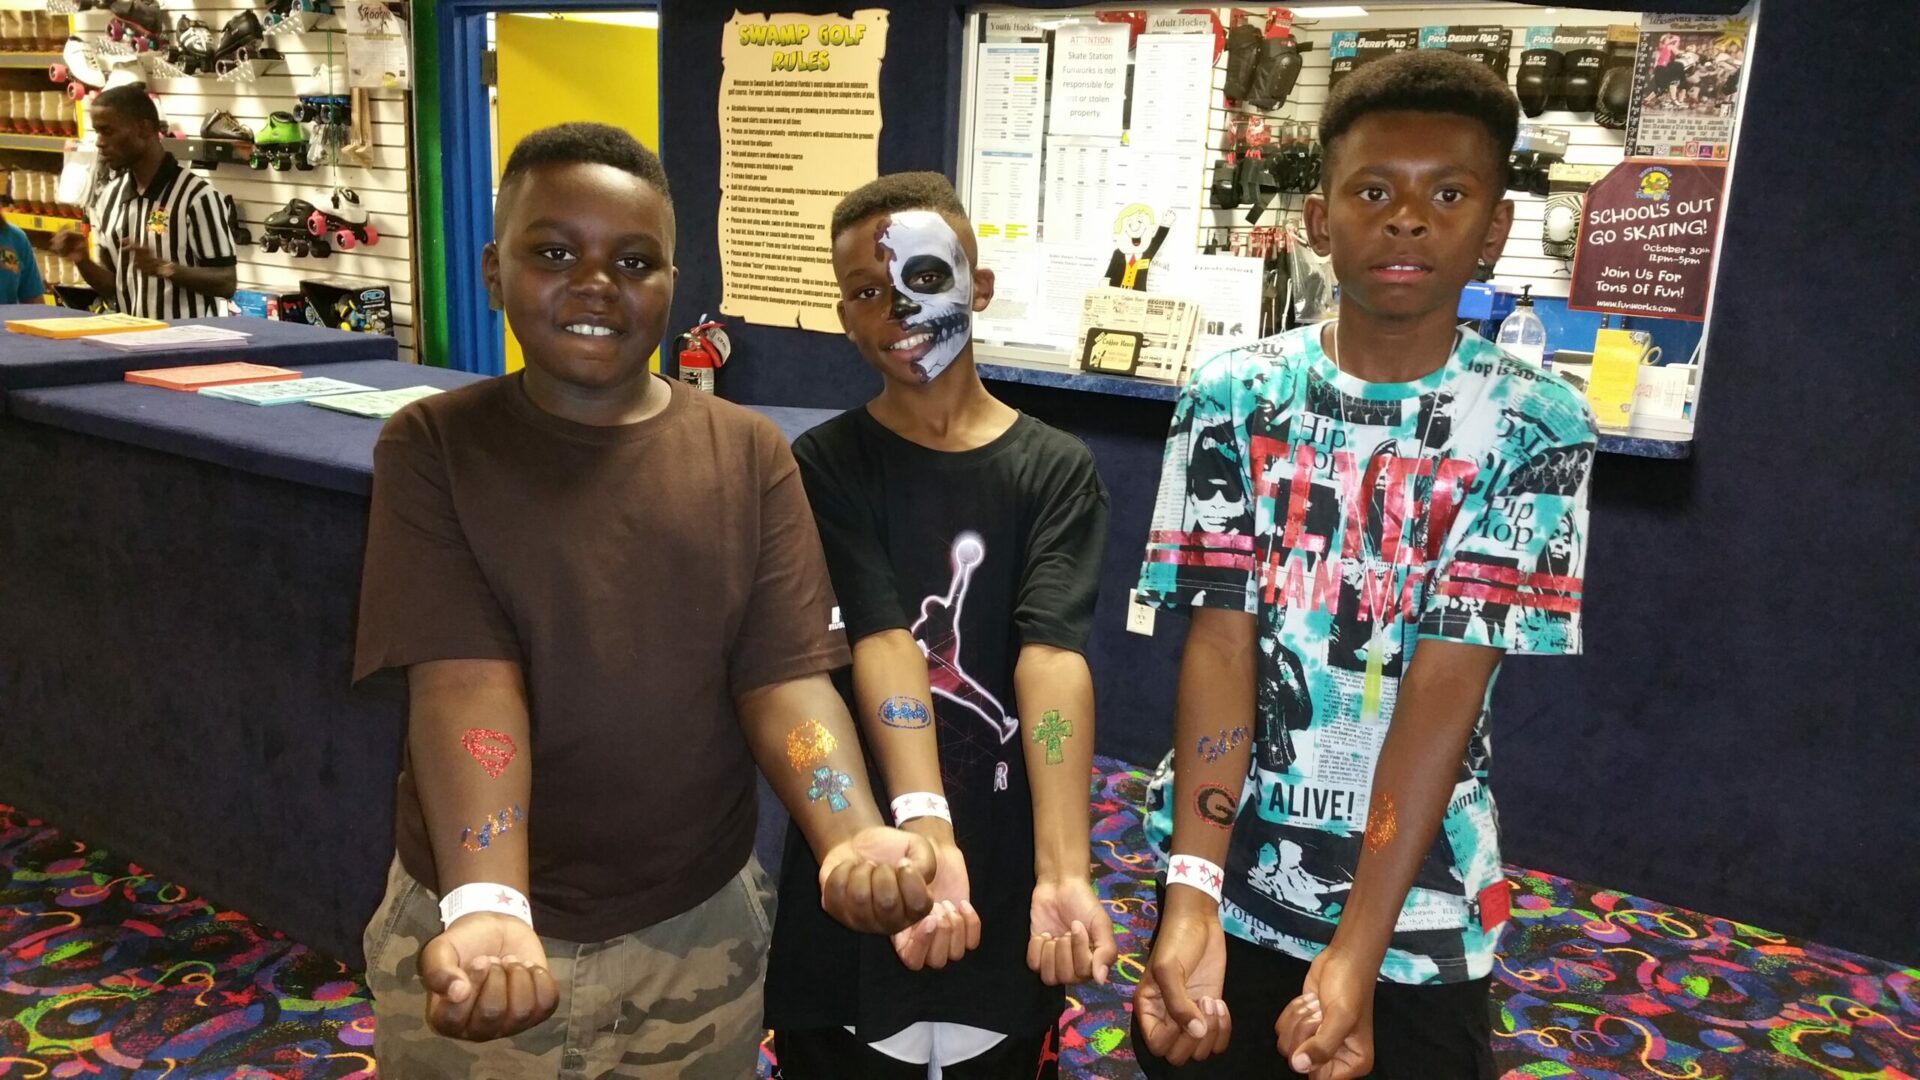 Three young men with their faces painted and holding hands.